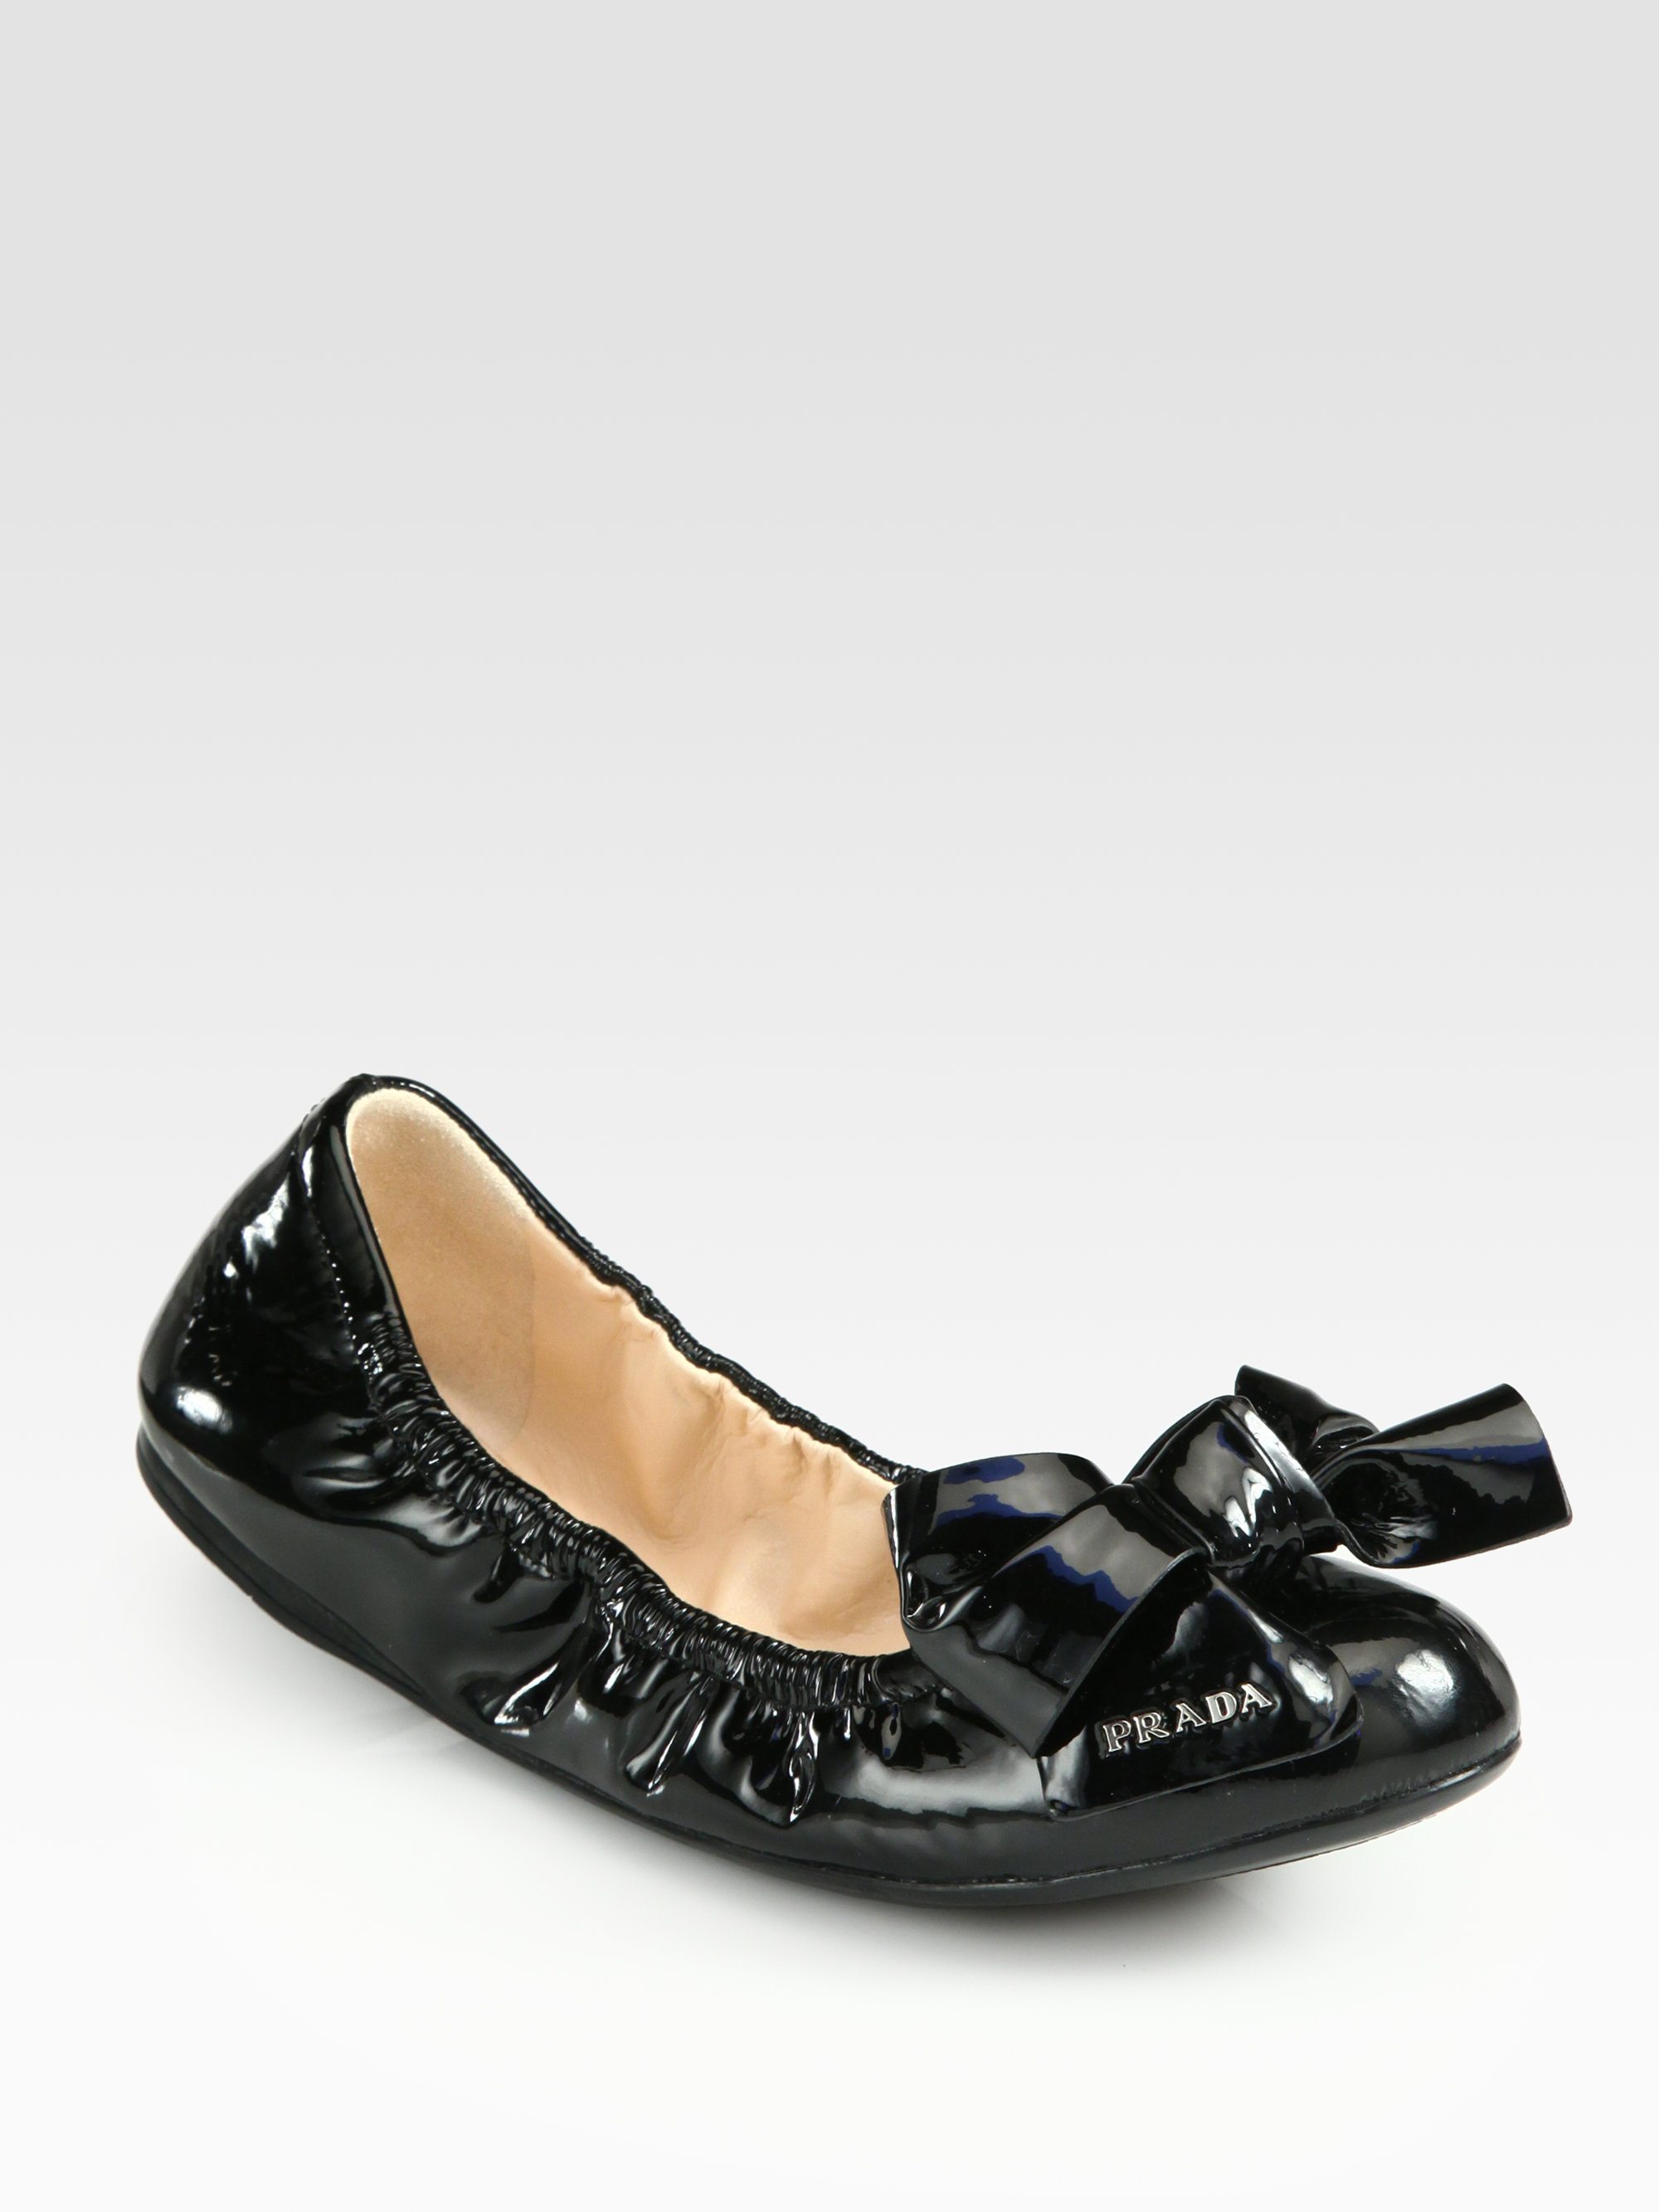 black patent leather flats with bow